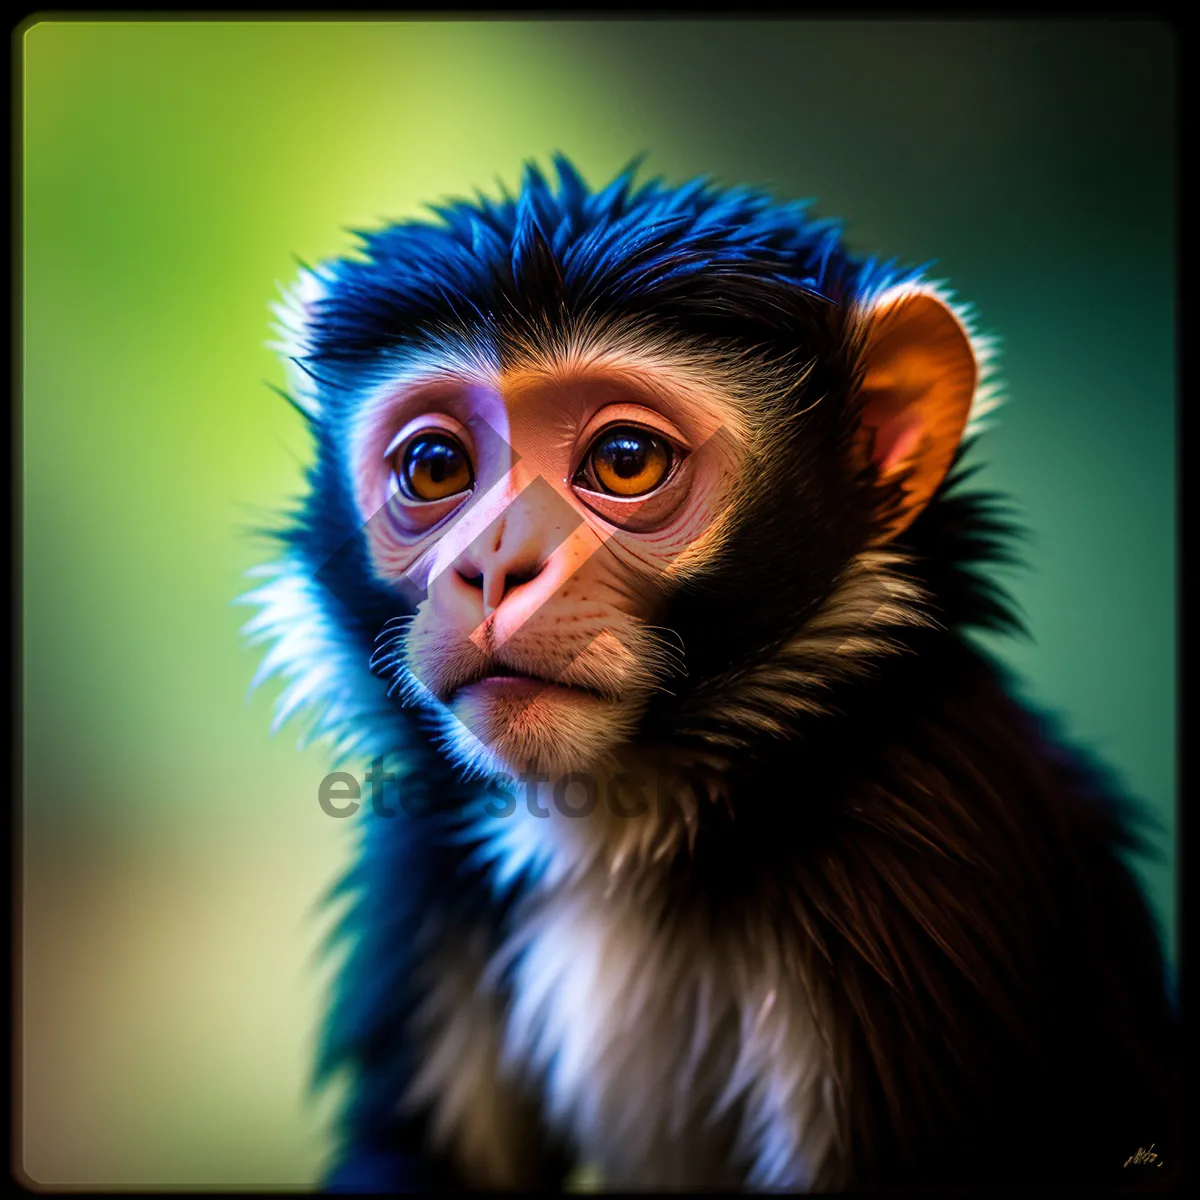 Picture of Adorable Monkey Portrait in the Wild